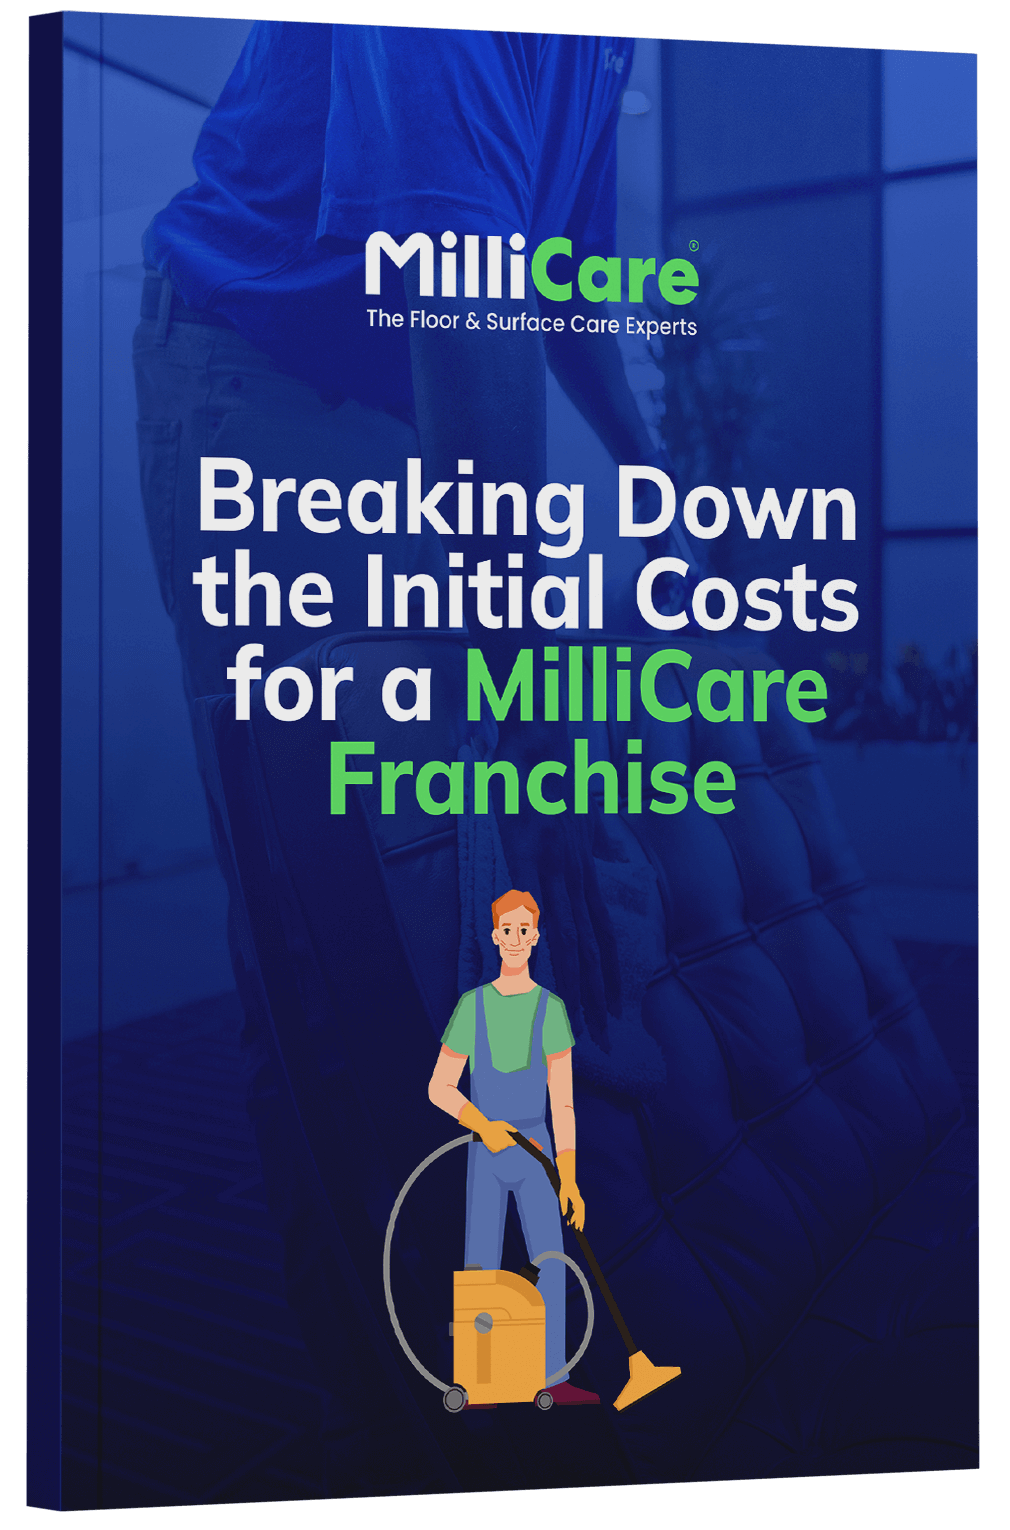 Breaking Down the Initial Costs for a MilliCare Franchise